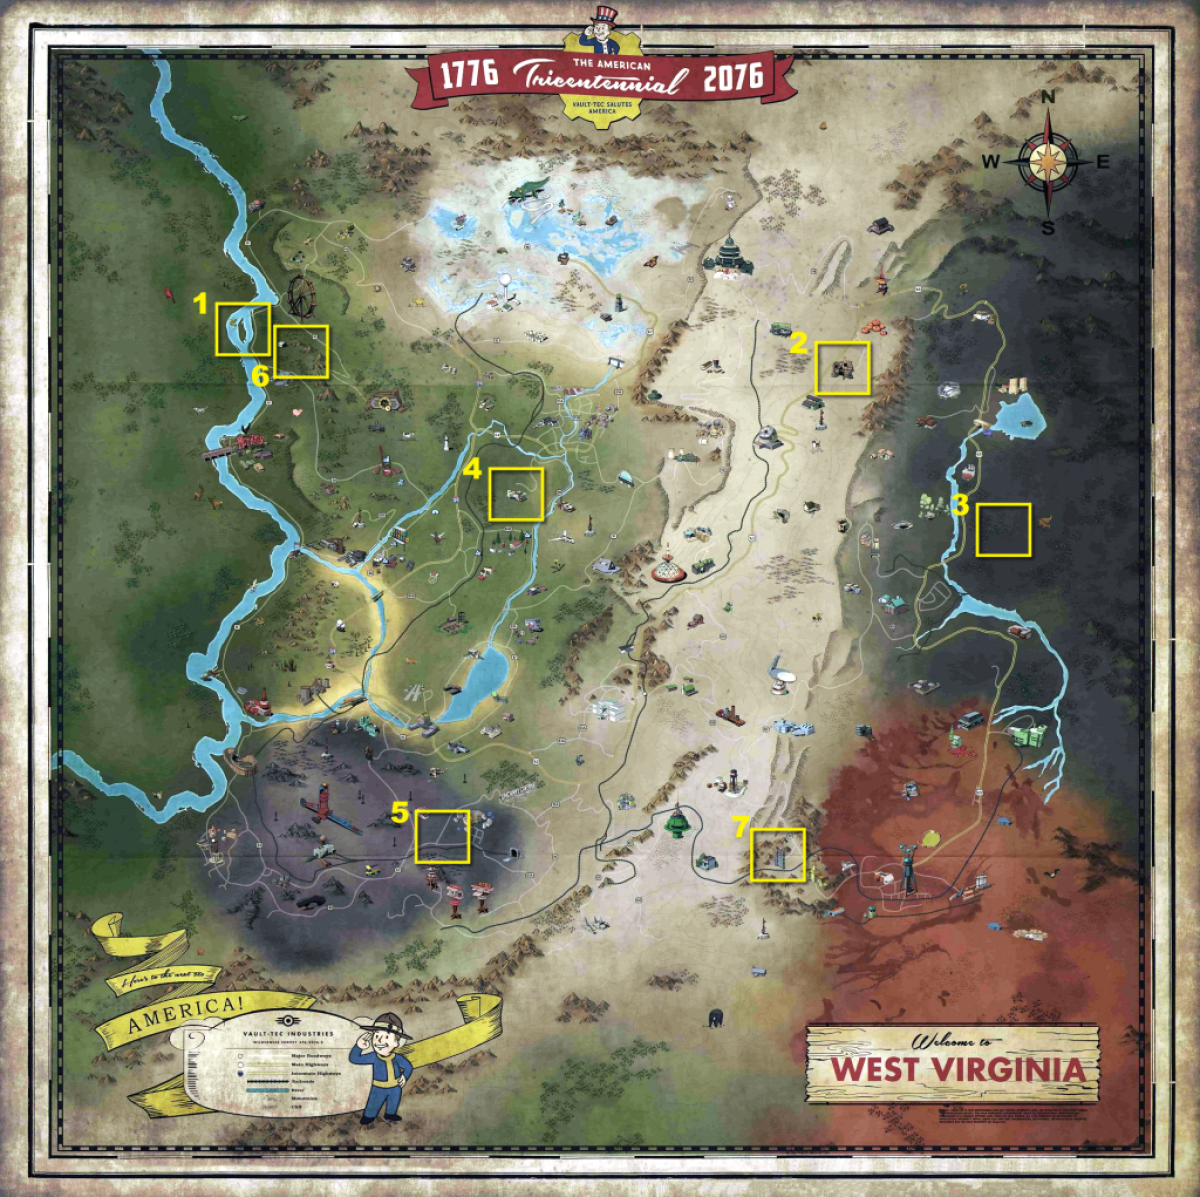 Deathclaw egg locations marked on the Fallout 76 map